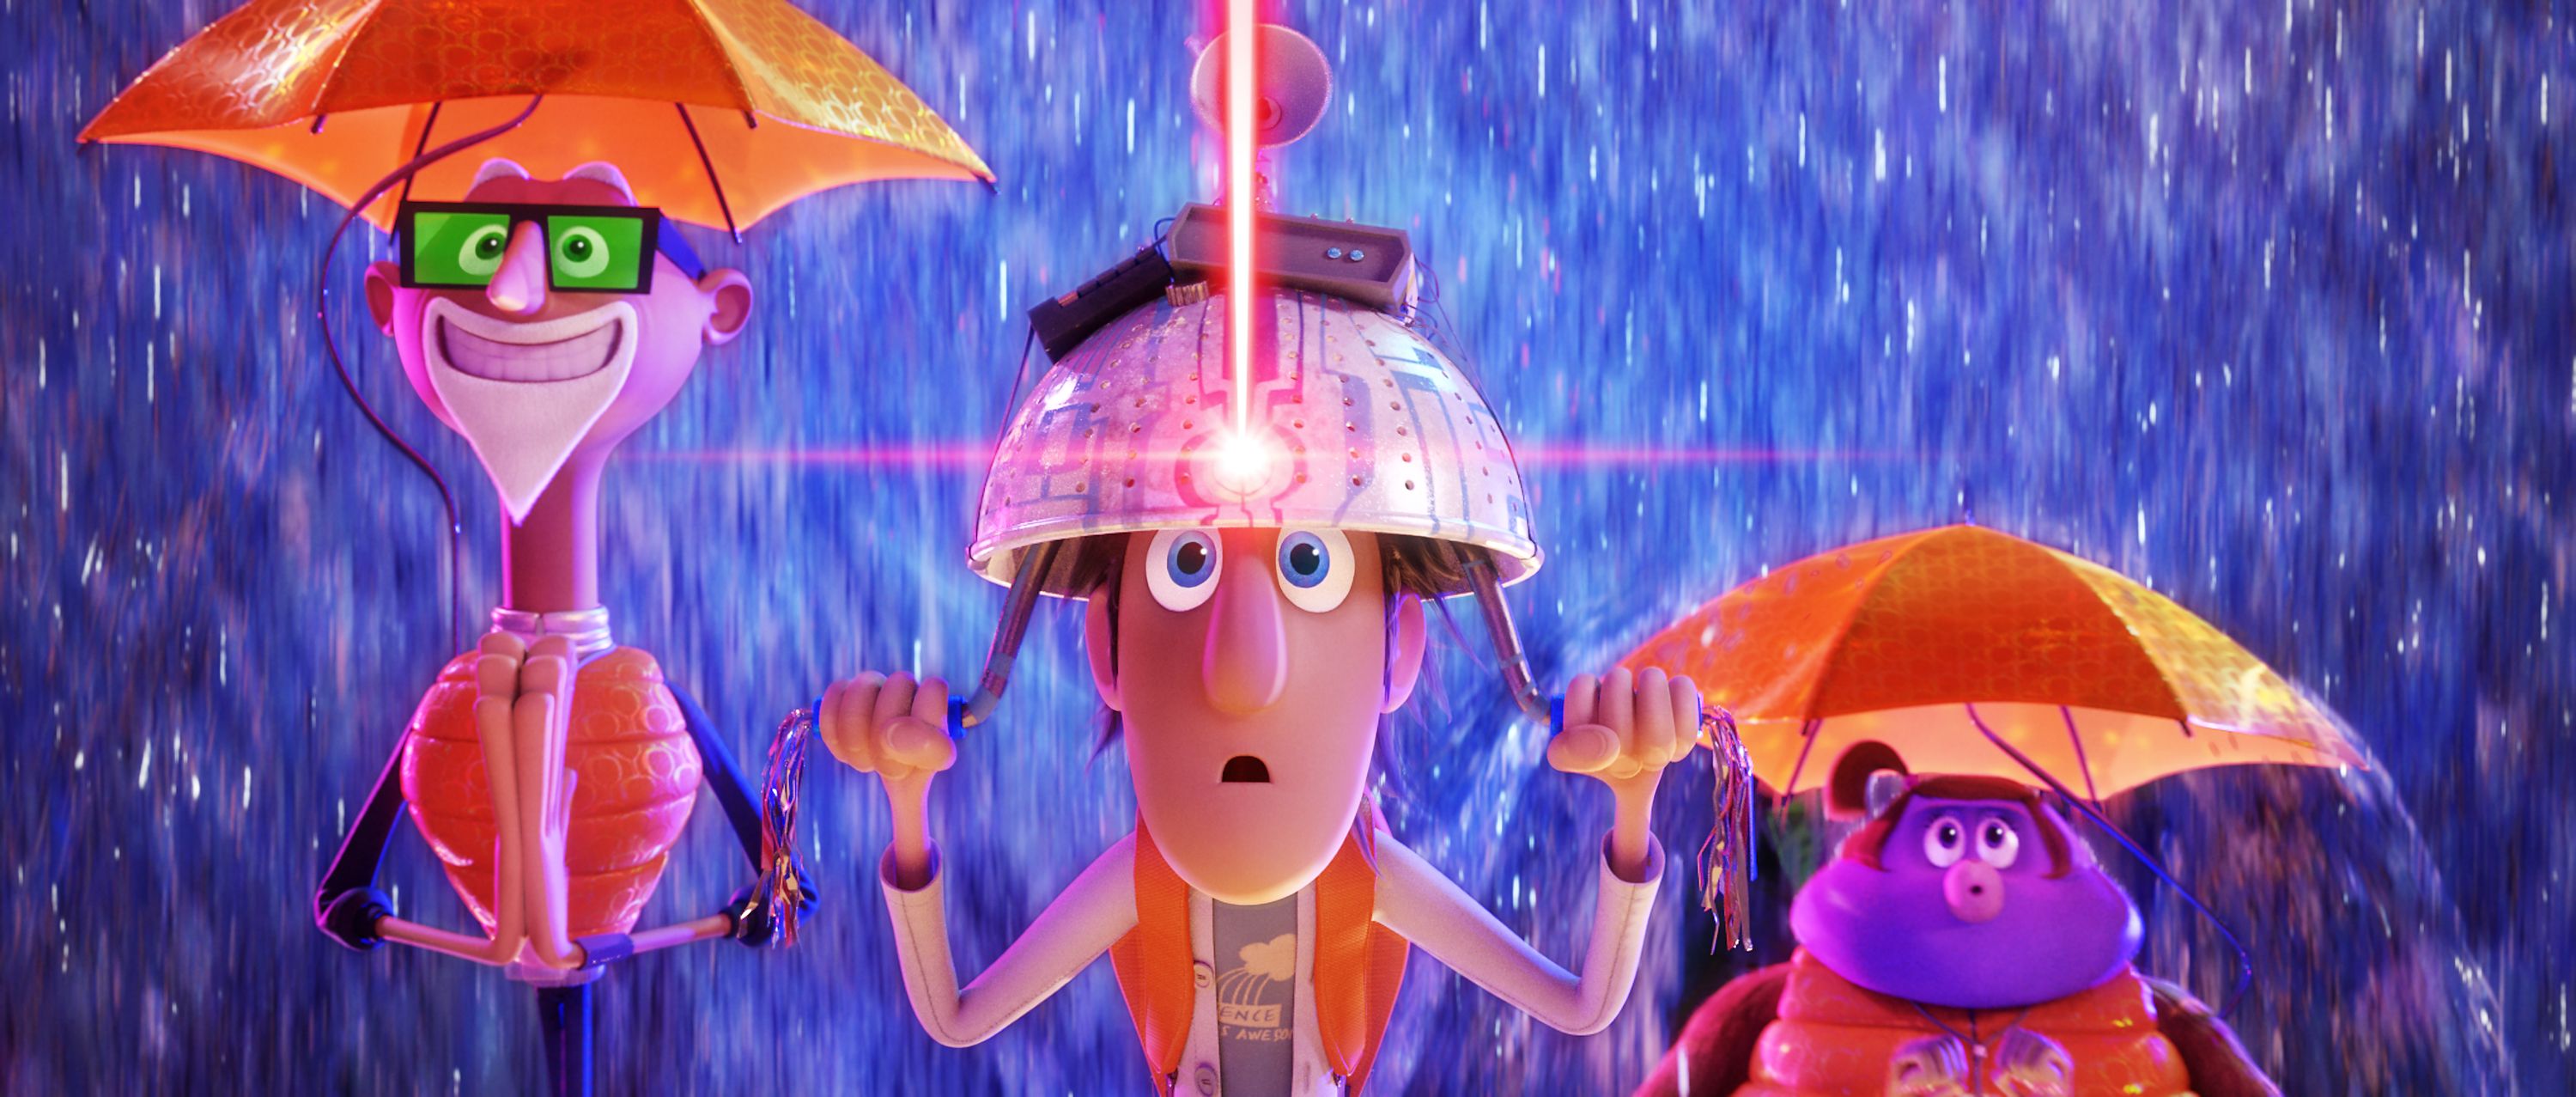 Cloudy with a Chance of Meatballs 2 Photo 7